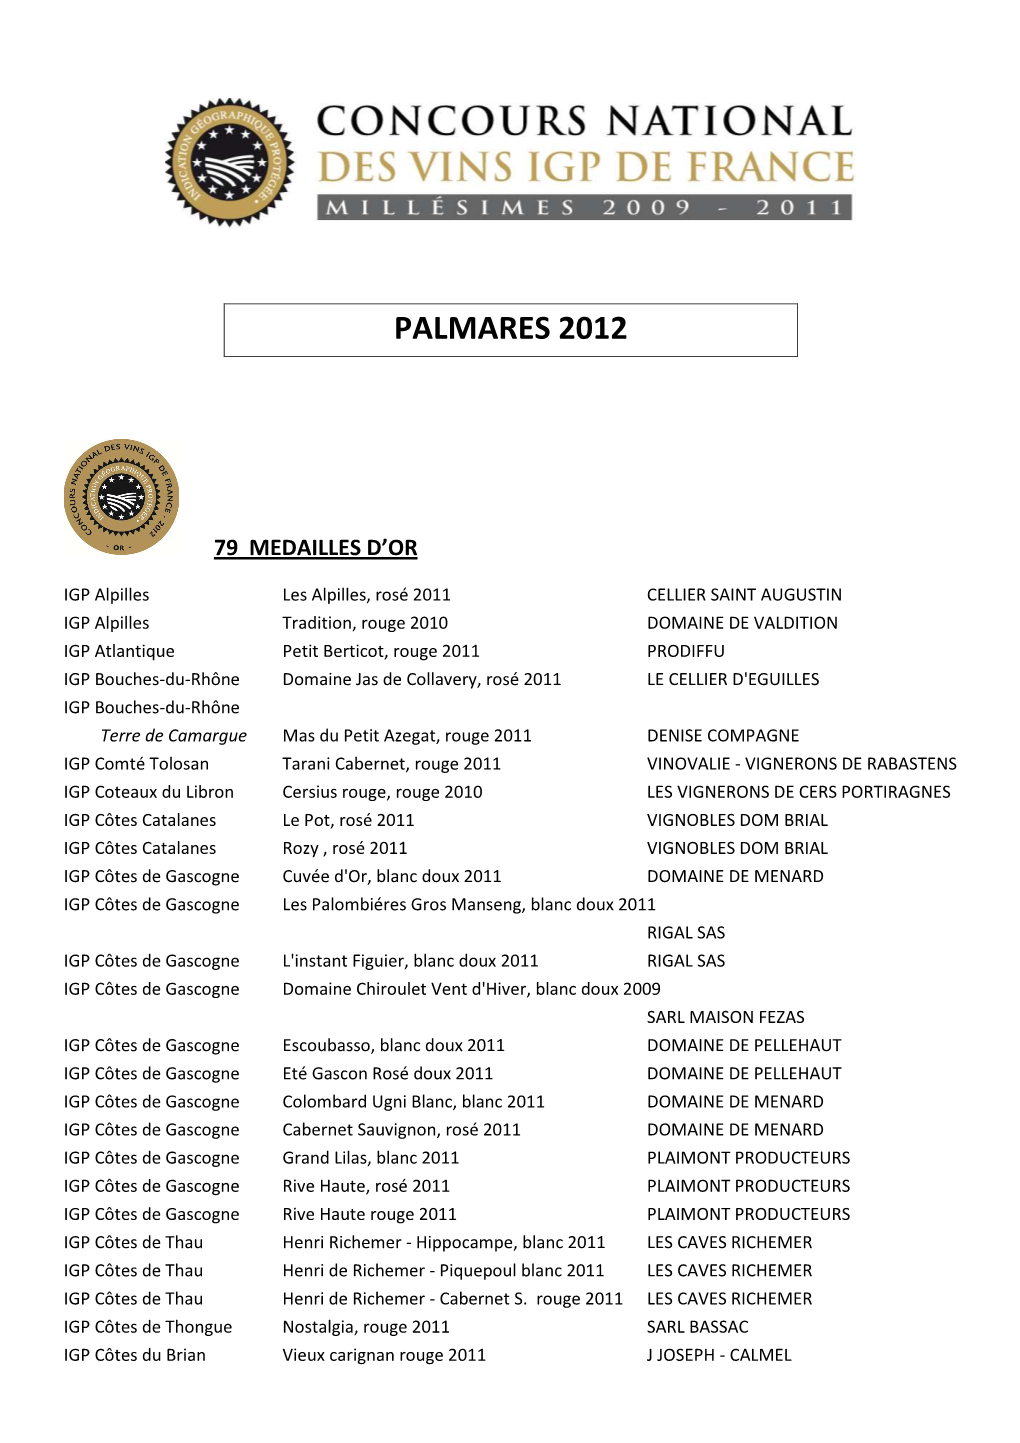 PALMARES 2012 Concours National